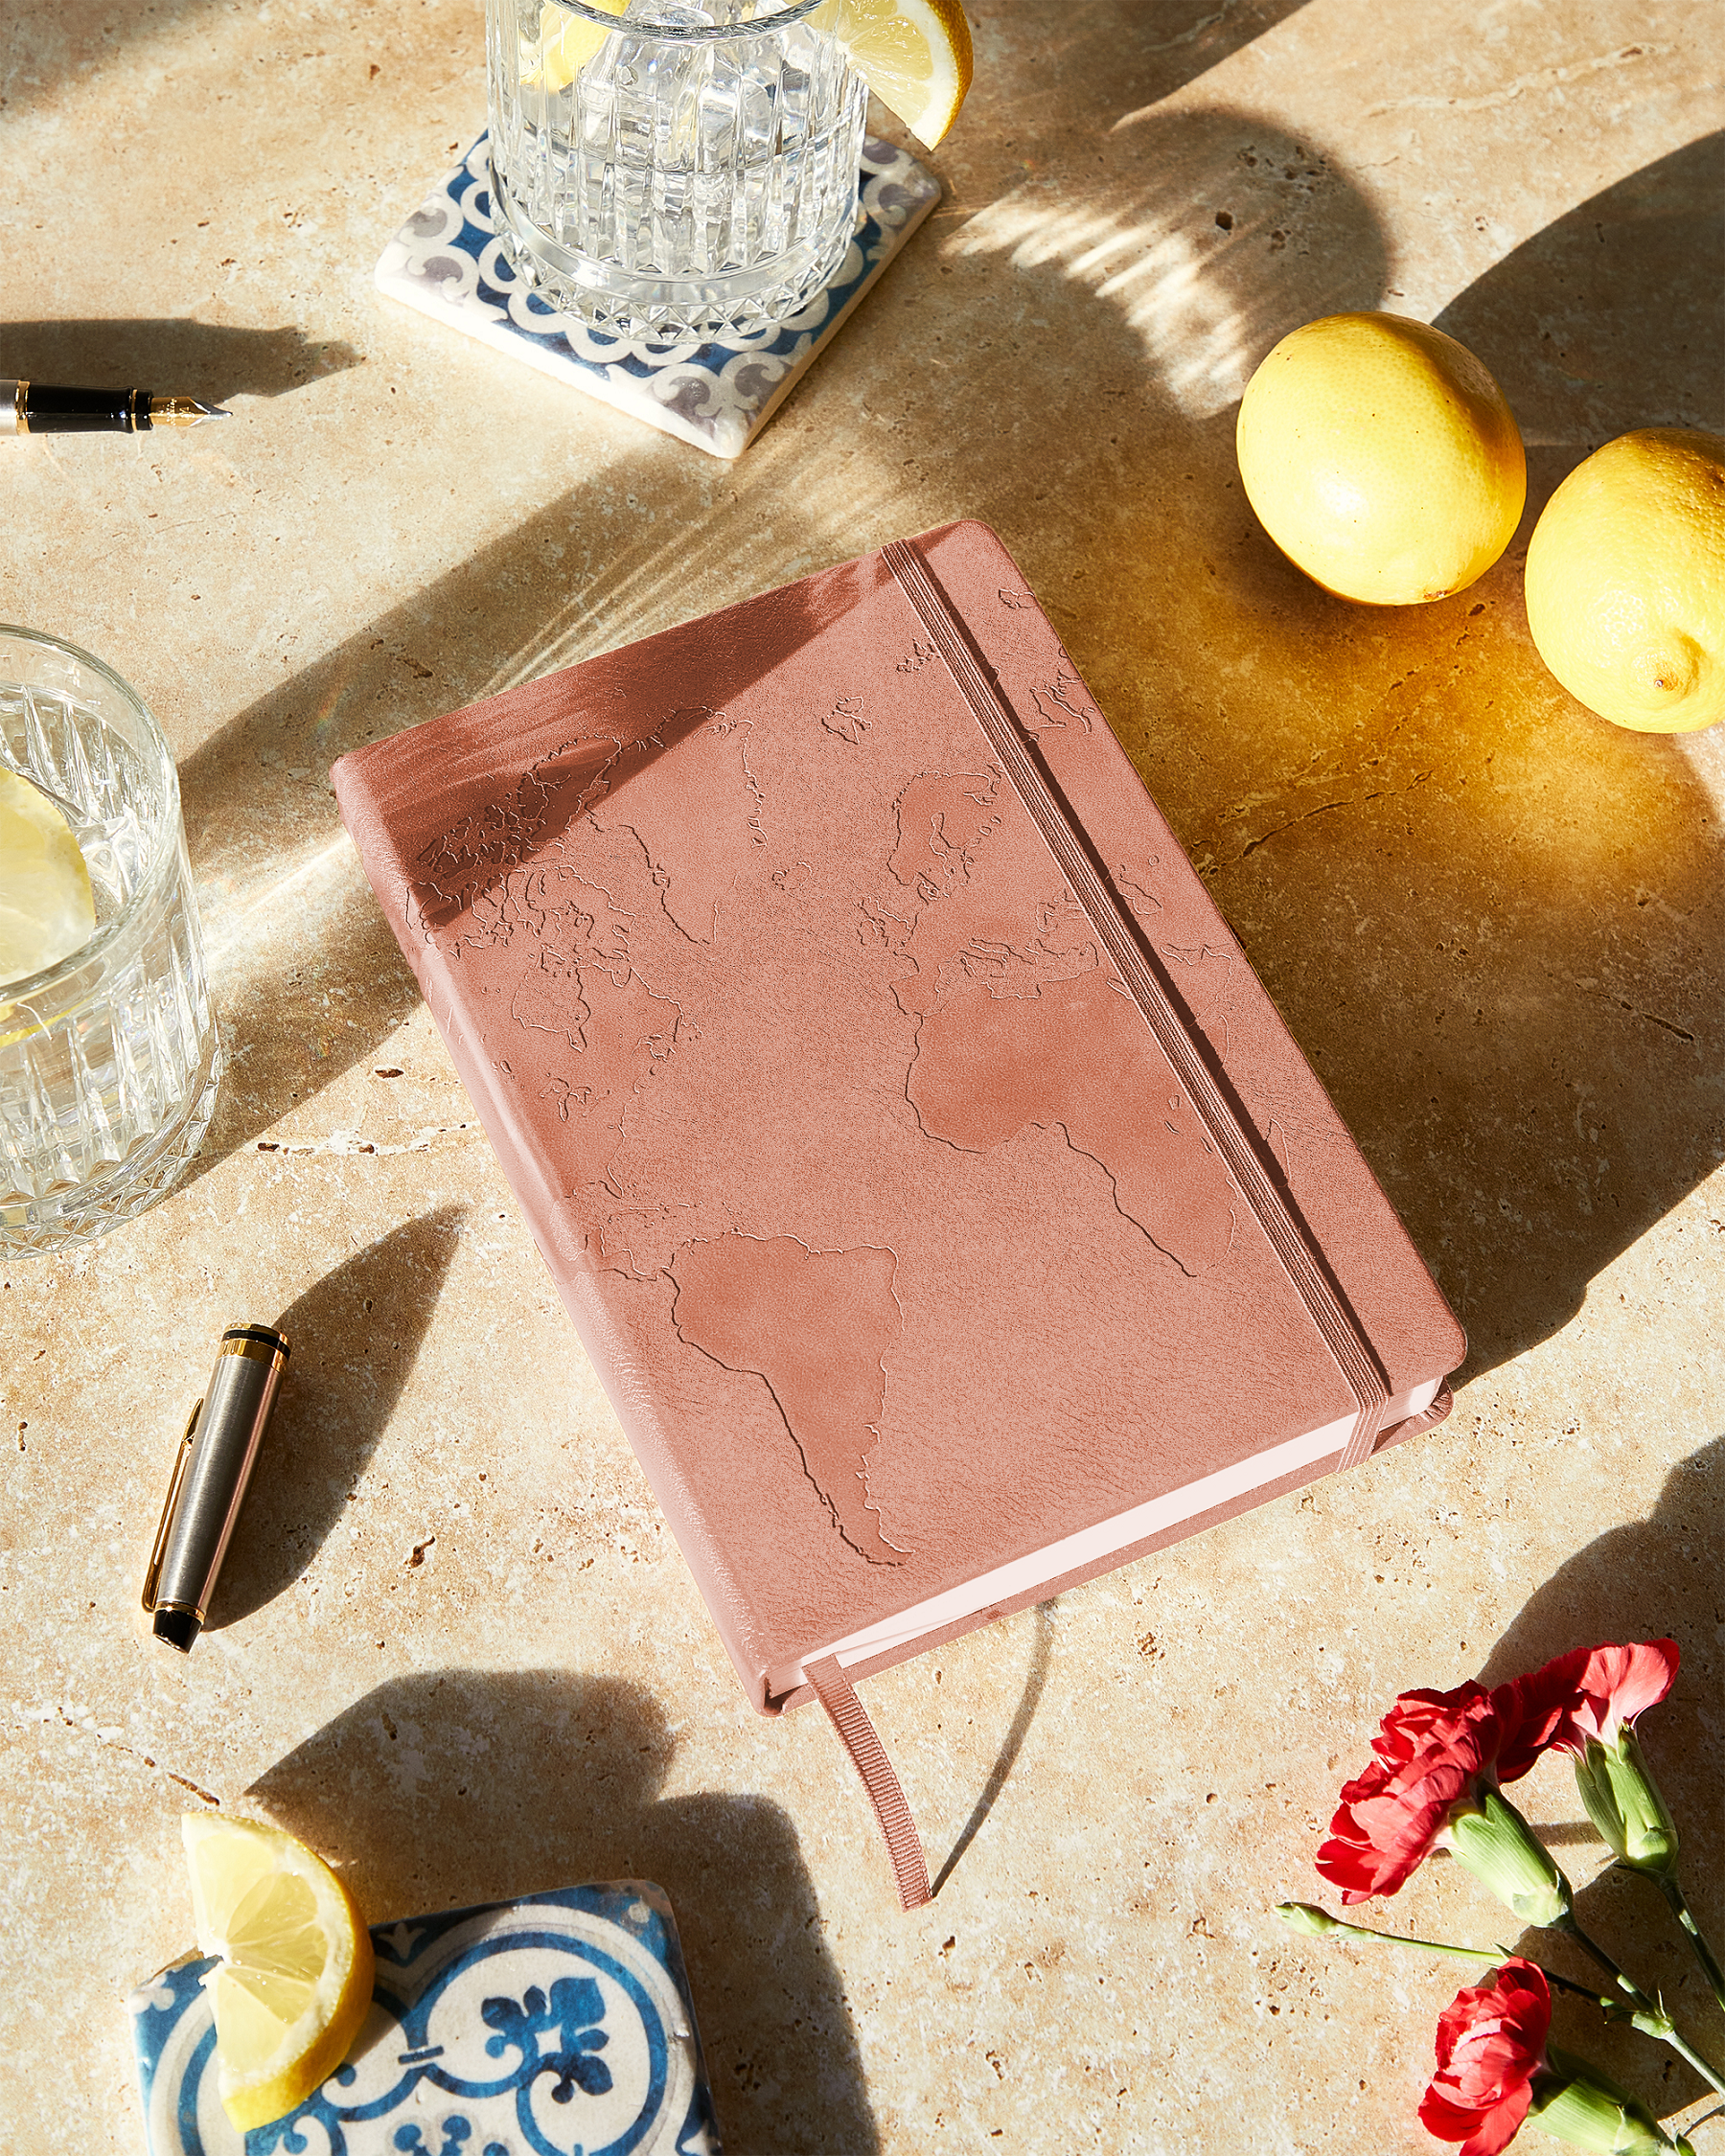 Artisanal Rose Wood travel planner in A5, where craftsmanship meets wanderlust in a Beechmore design.